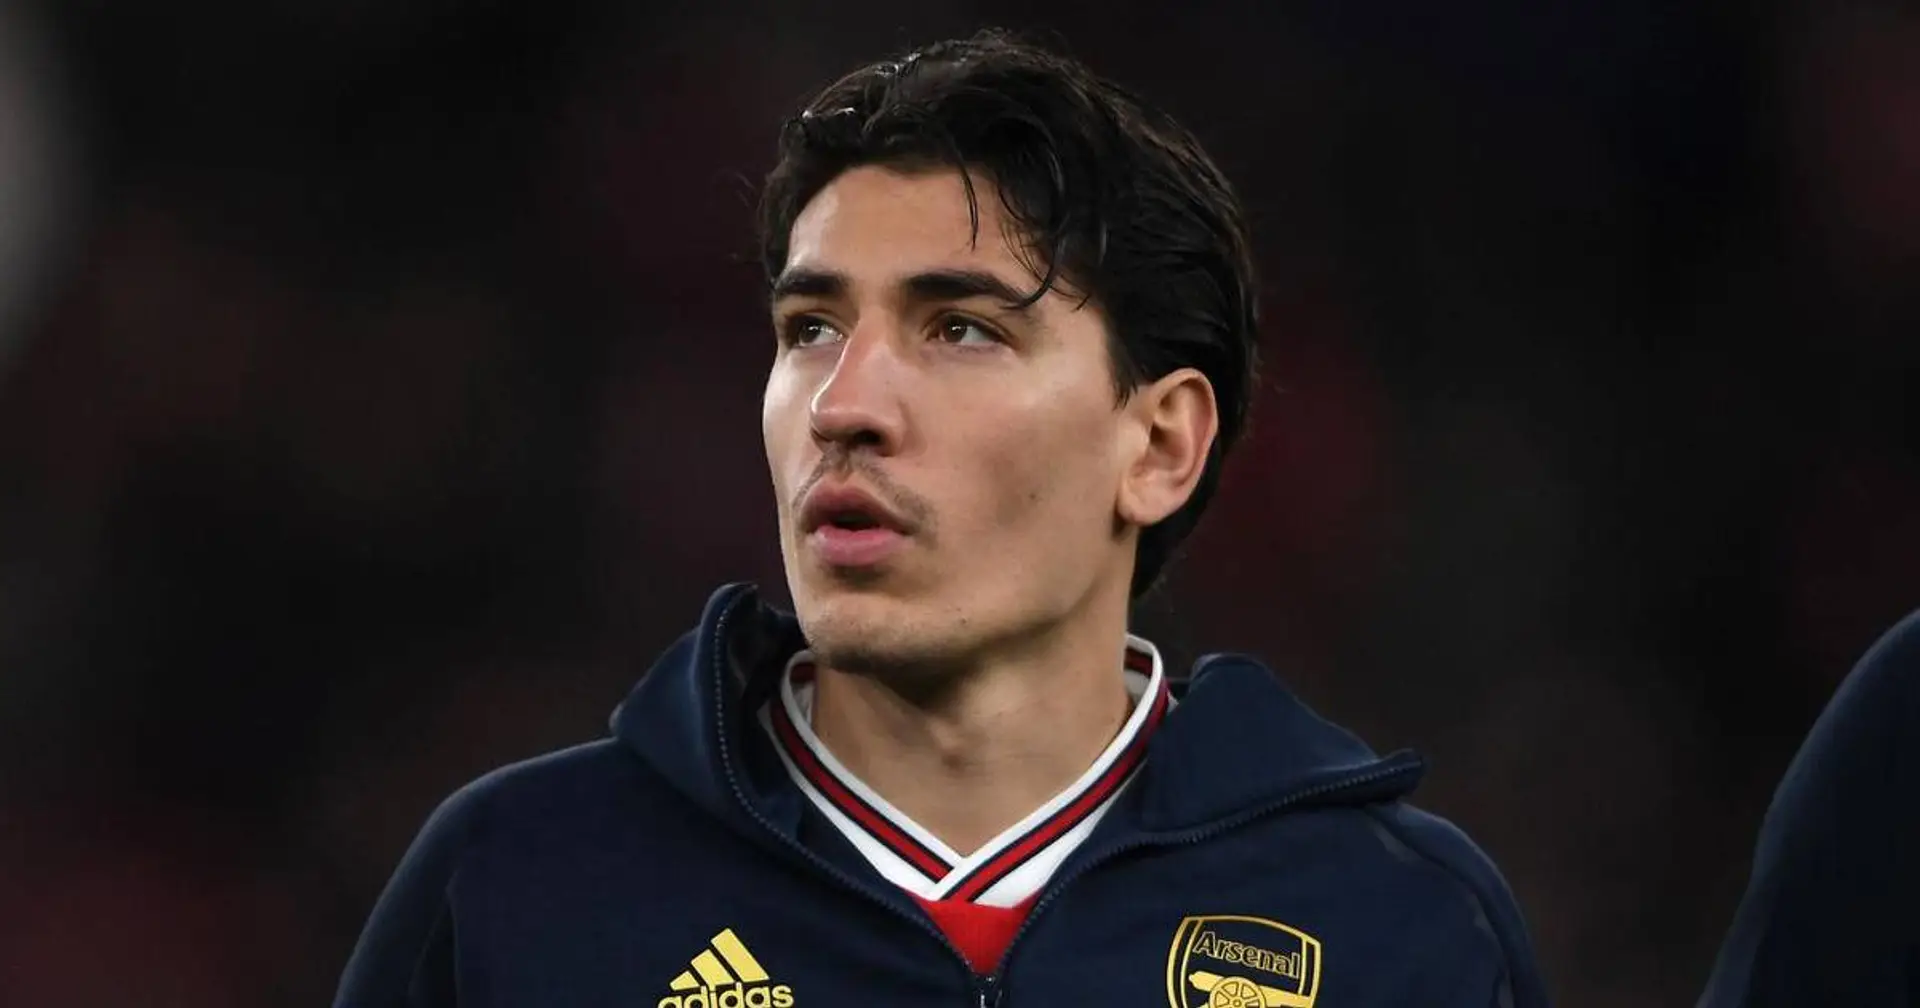 'He is a good player that contributes at both ends of the pitch': fan names 4 major reasons to keep Bellerin